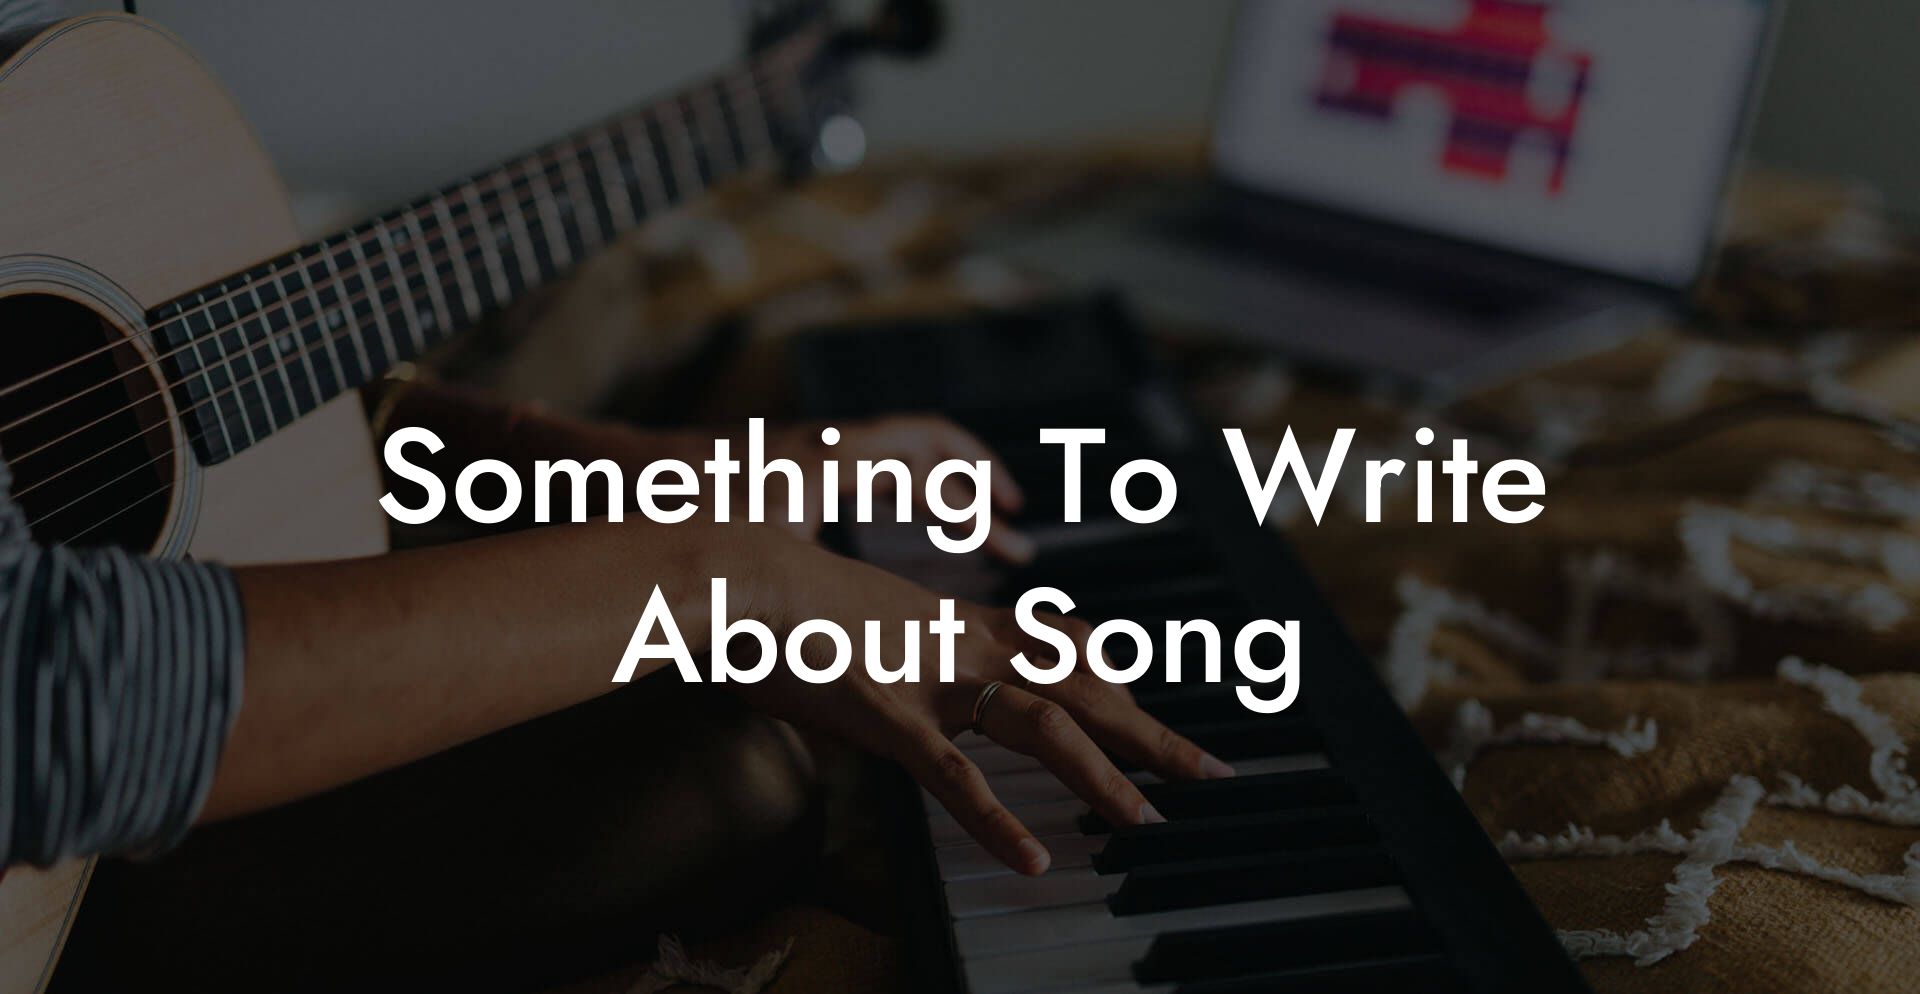 something to write about song lyric assistant